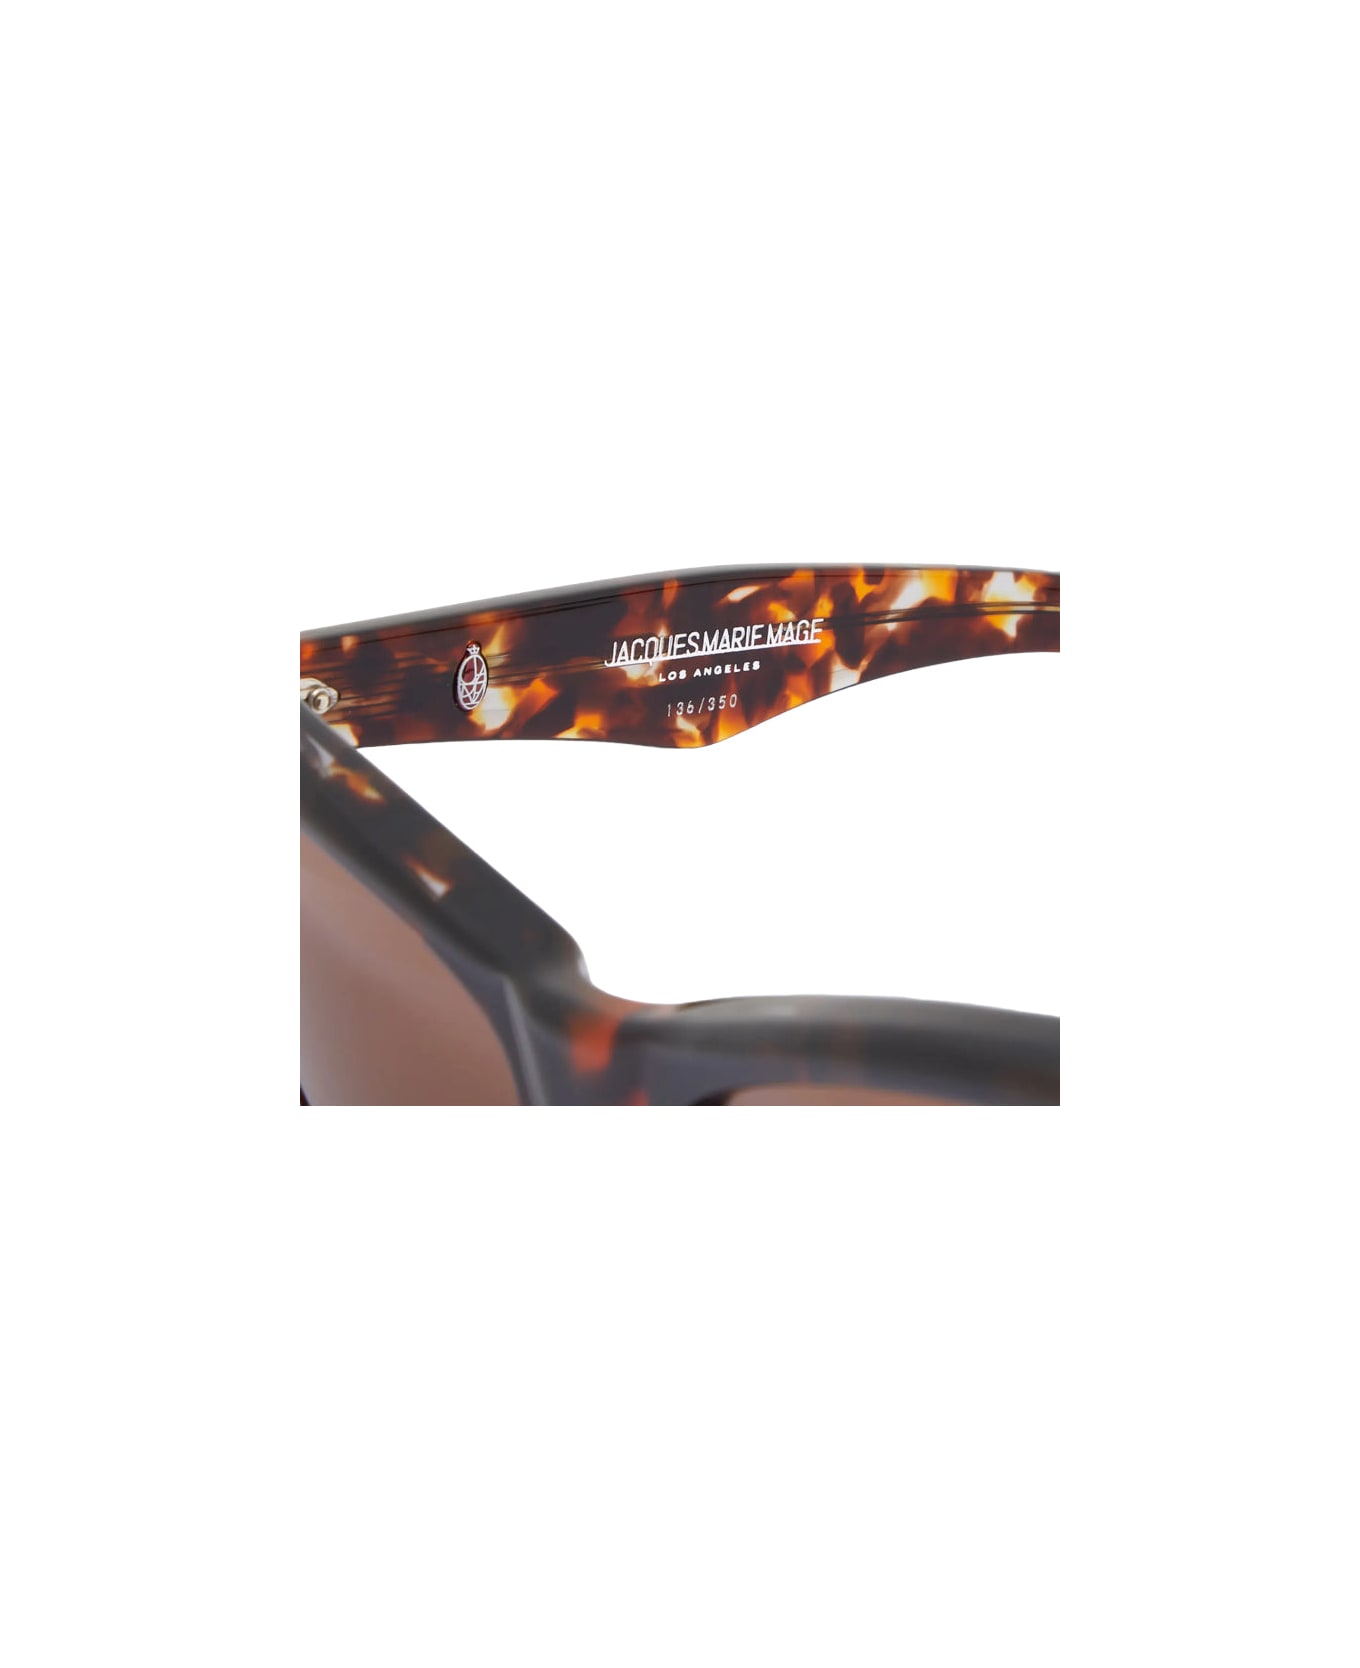 Jacques Marie Mage Kelly - Tortoise Sunglasses